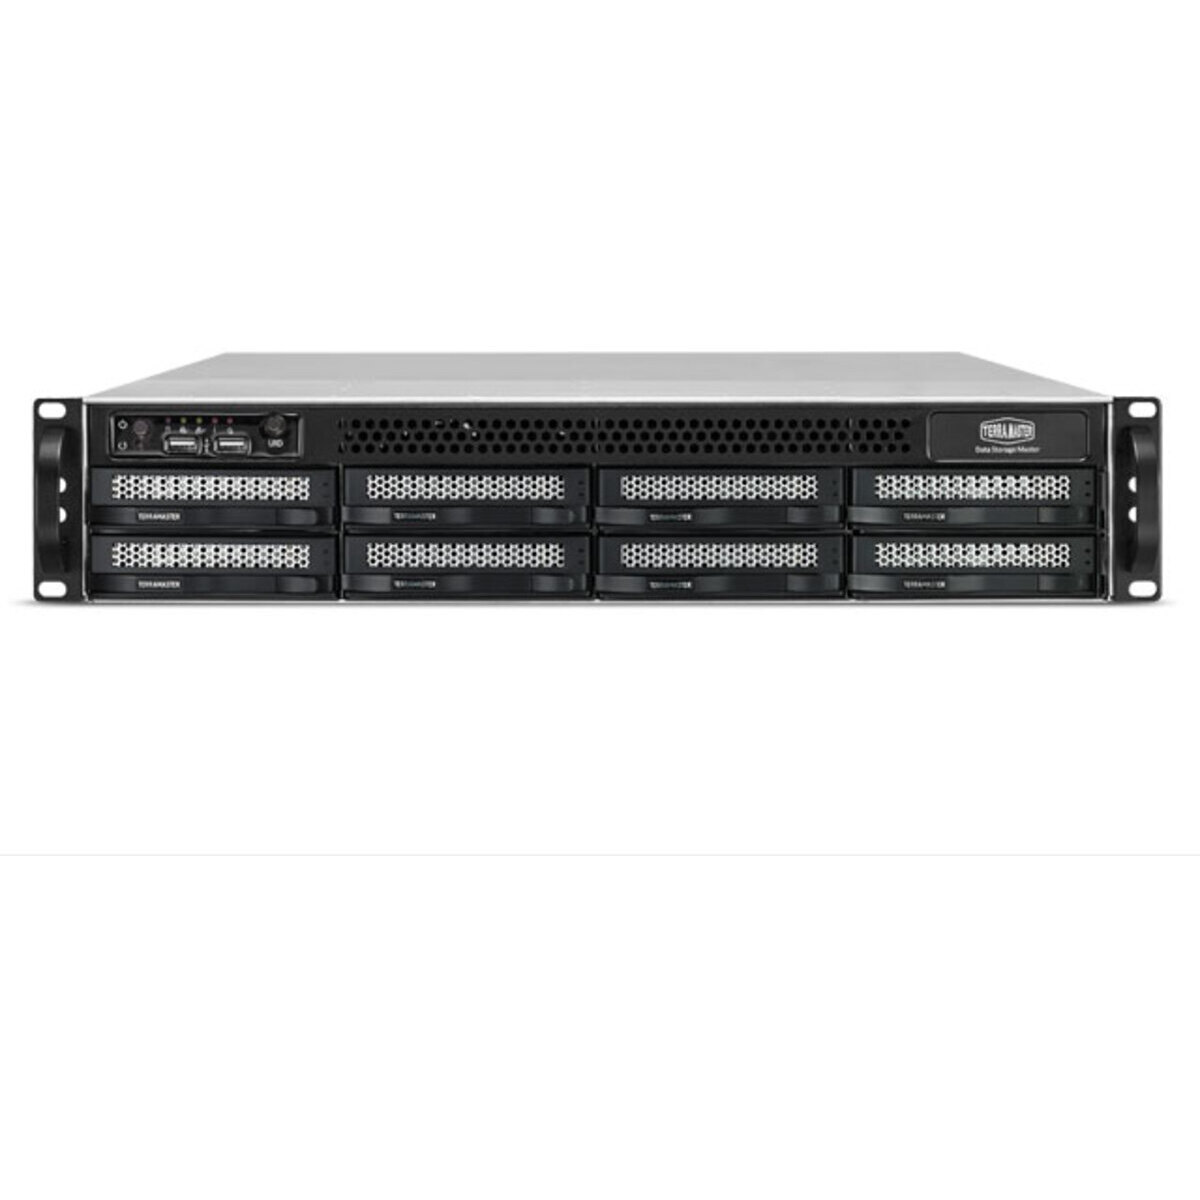 TerraMaster U8-722-2224 3.5tb 8-Bay RackMount Large Business / Enterprise NAS - Network Attached Storage Device 7x500gb Crucial MX500 CT500MX500SSD1 2.5 560/510MB/s SATA 6Gb/s SSD CONSUMER Class Drives Installed - Burn-In Tested U8-722-2224